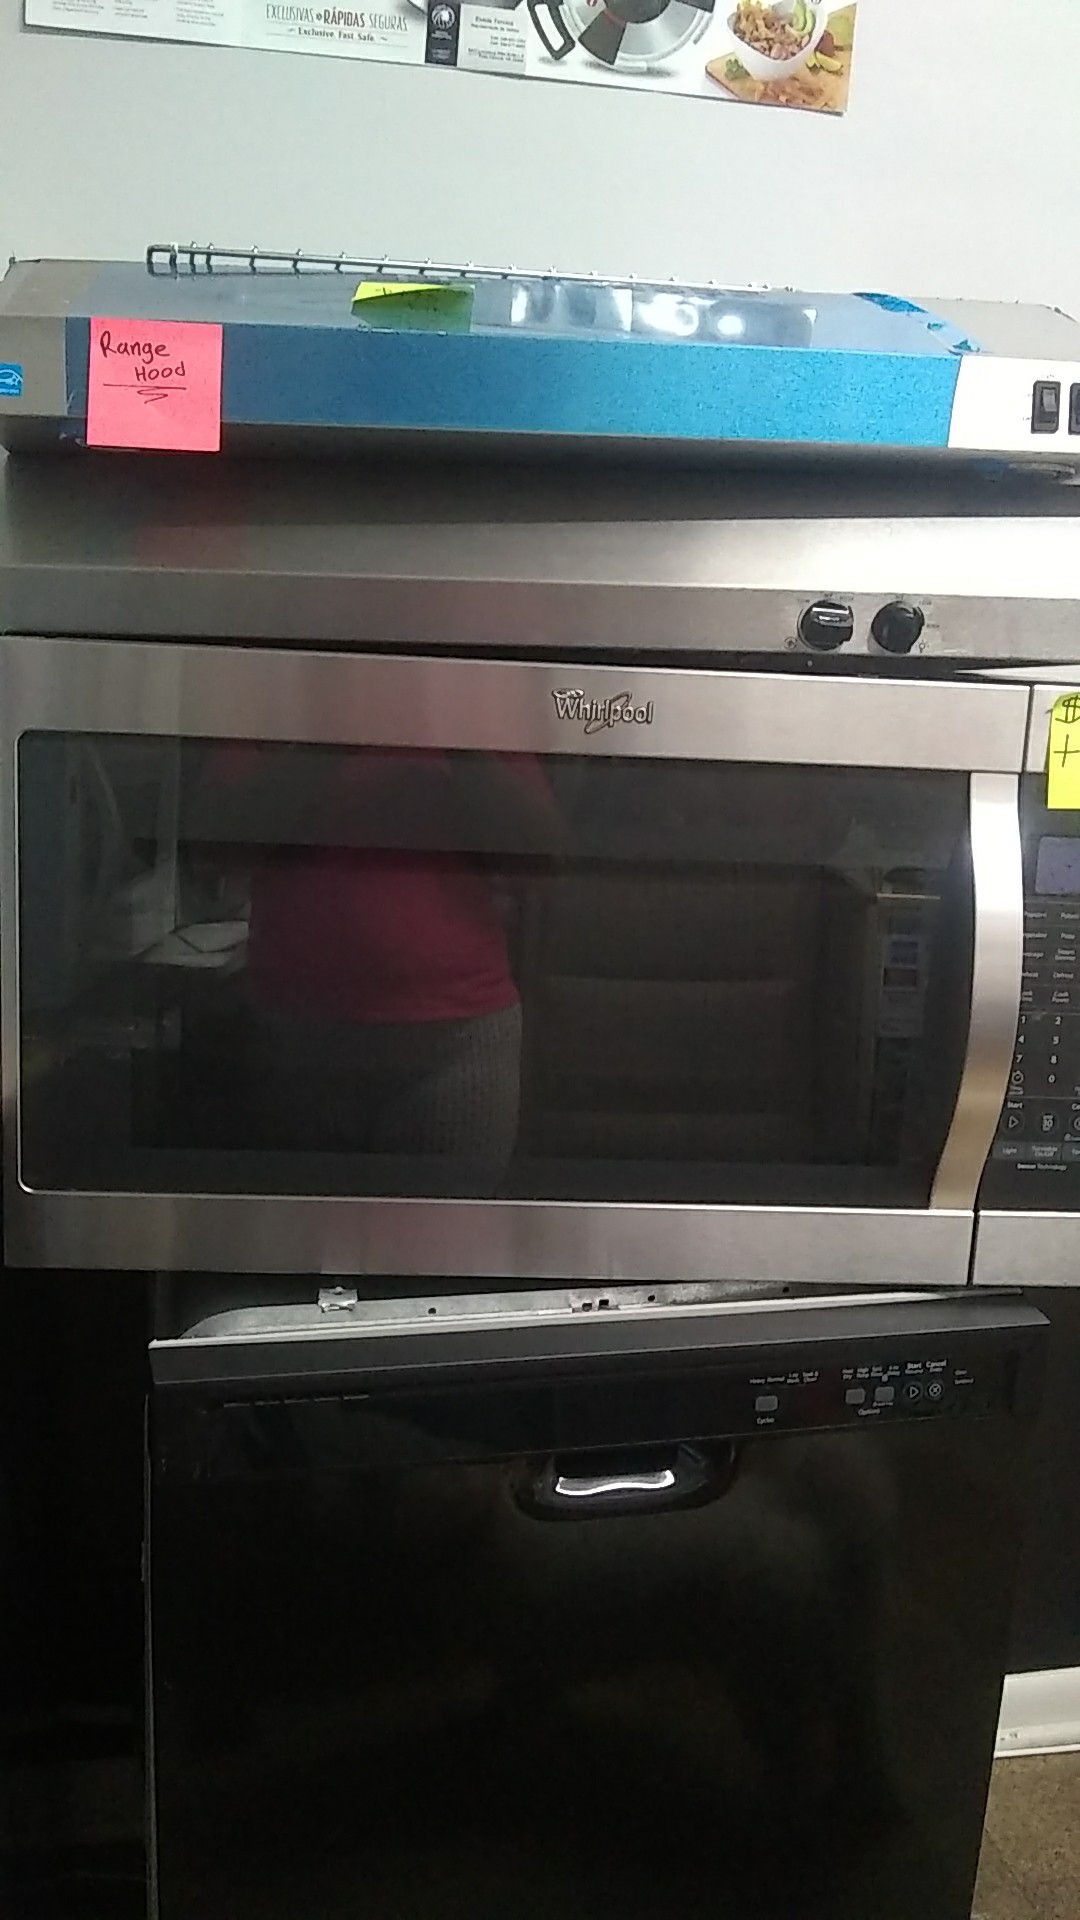 Whirlpool microwave oven brand new